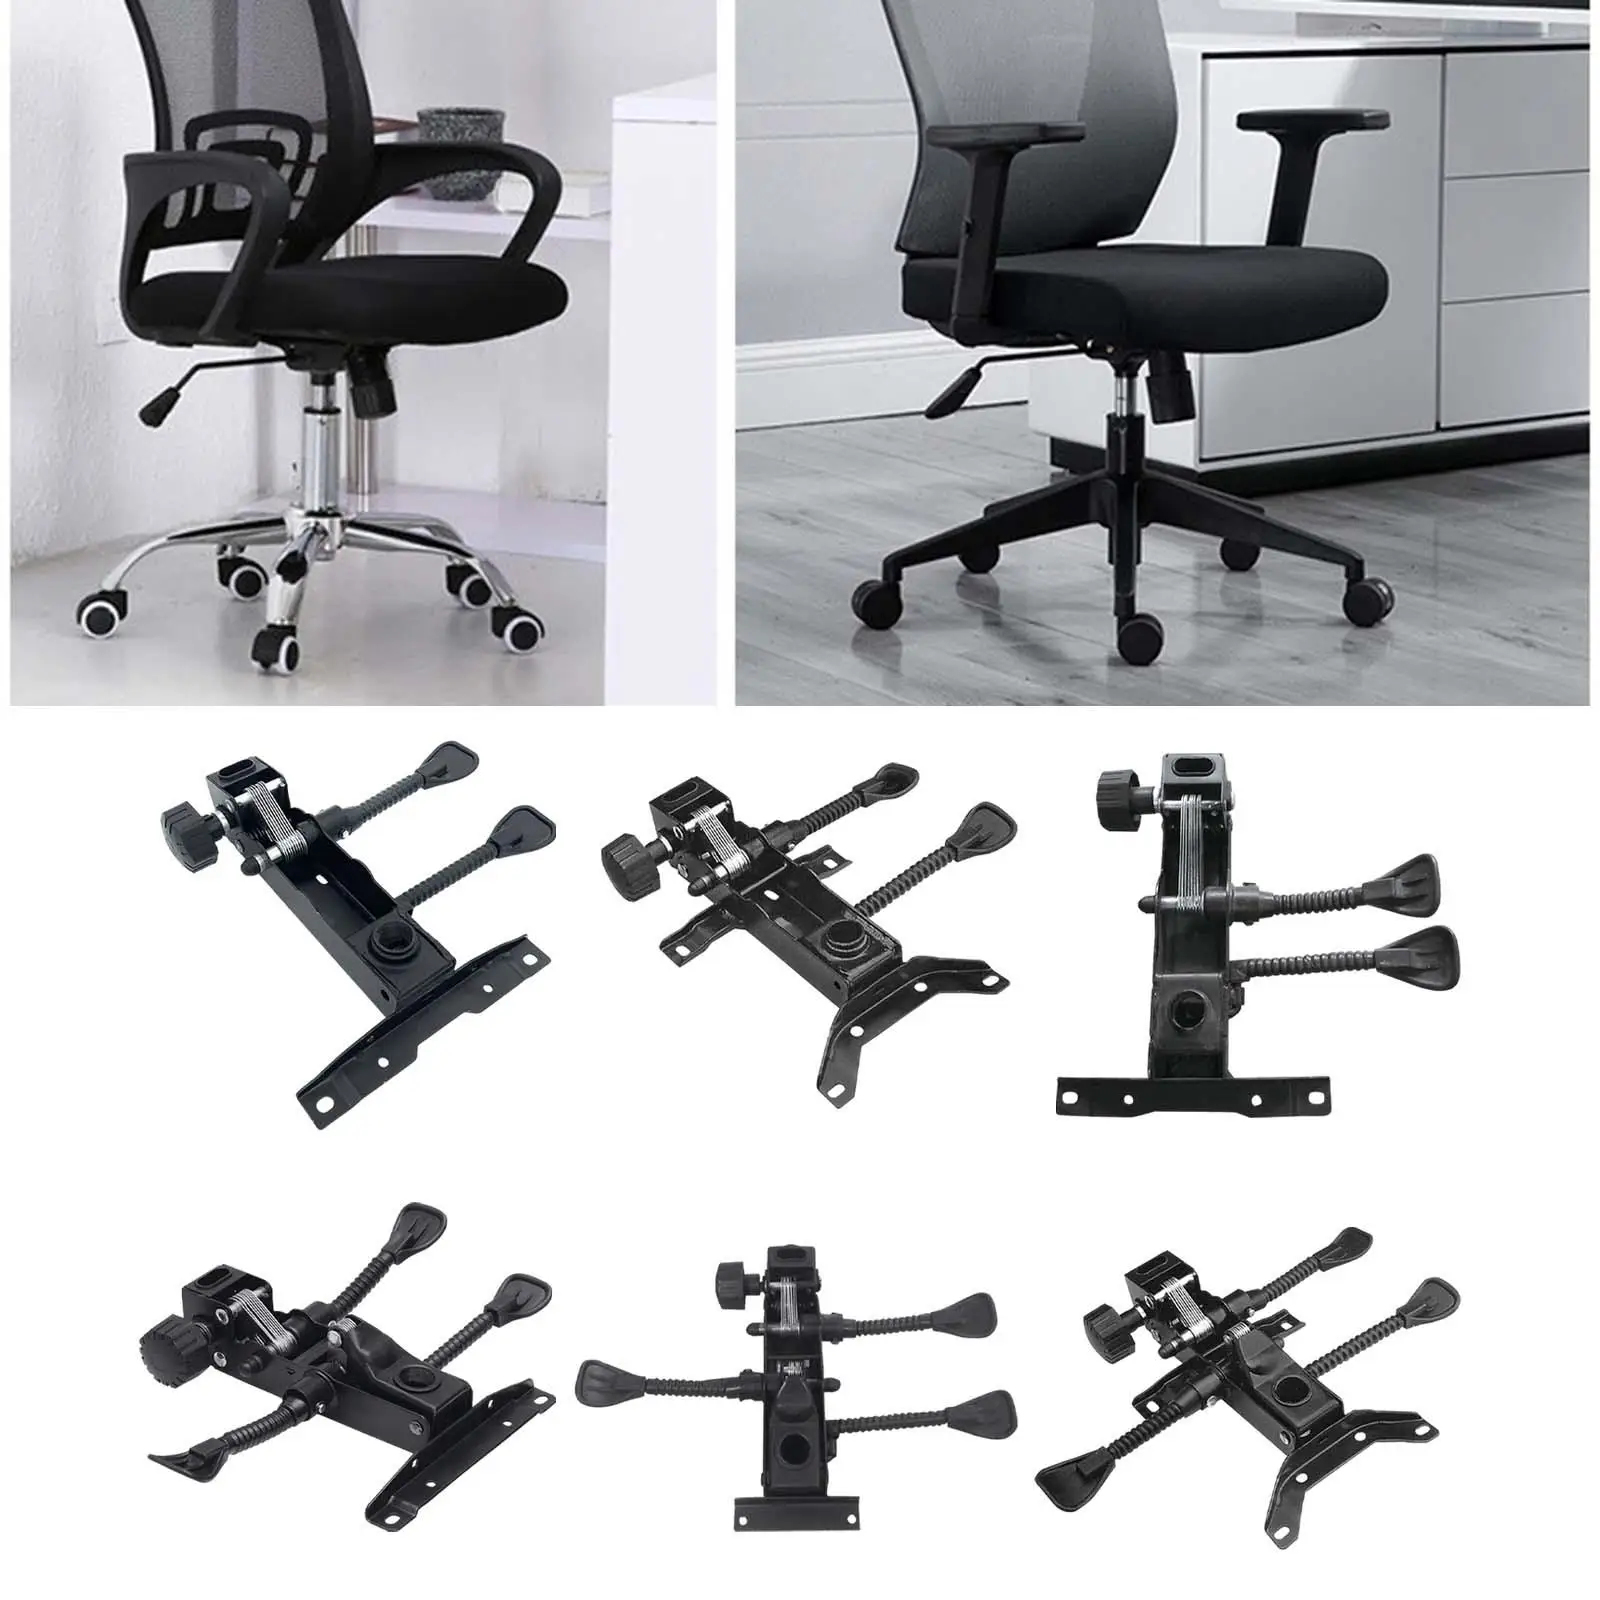 Swivel Tilt Control Seat Mechanism Heavy Duty Seat Chair Swivel Base Plate Lift Lever Handle for Gaming Chairs Swivel Chair